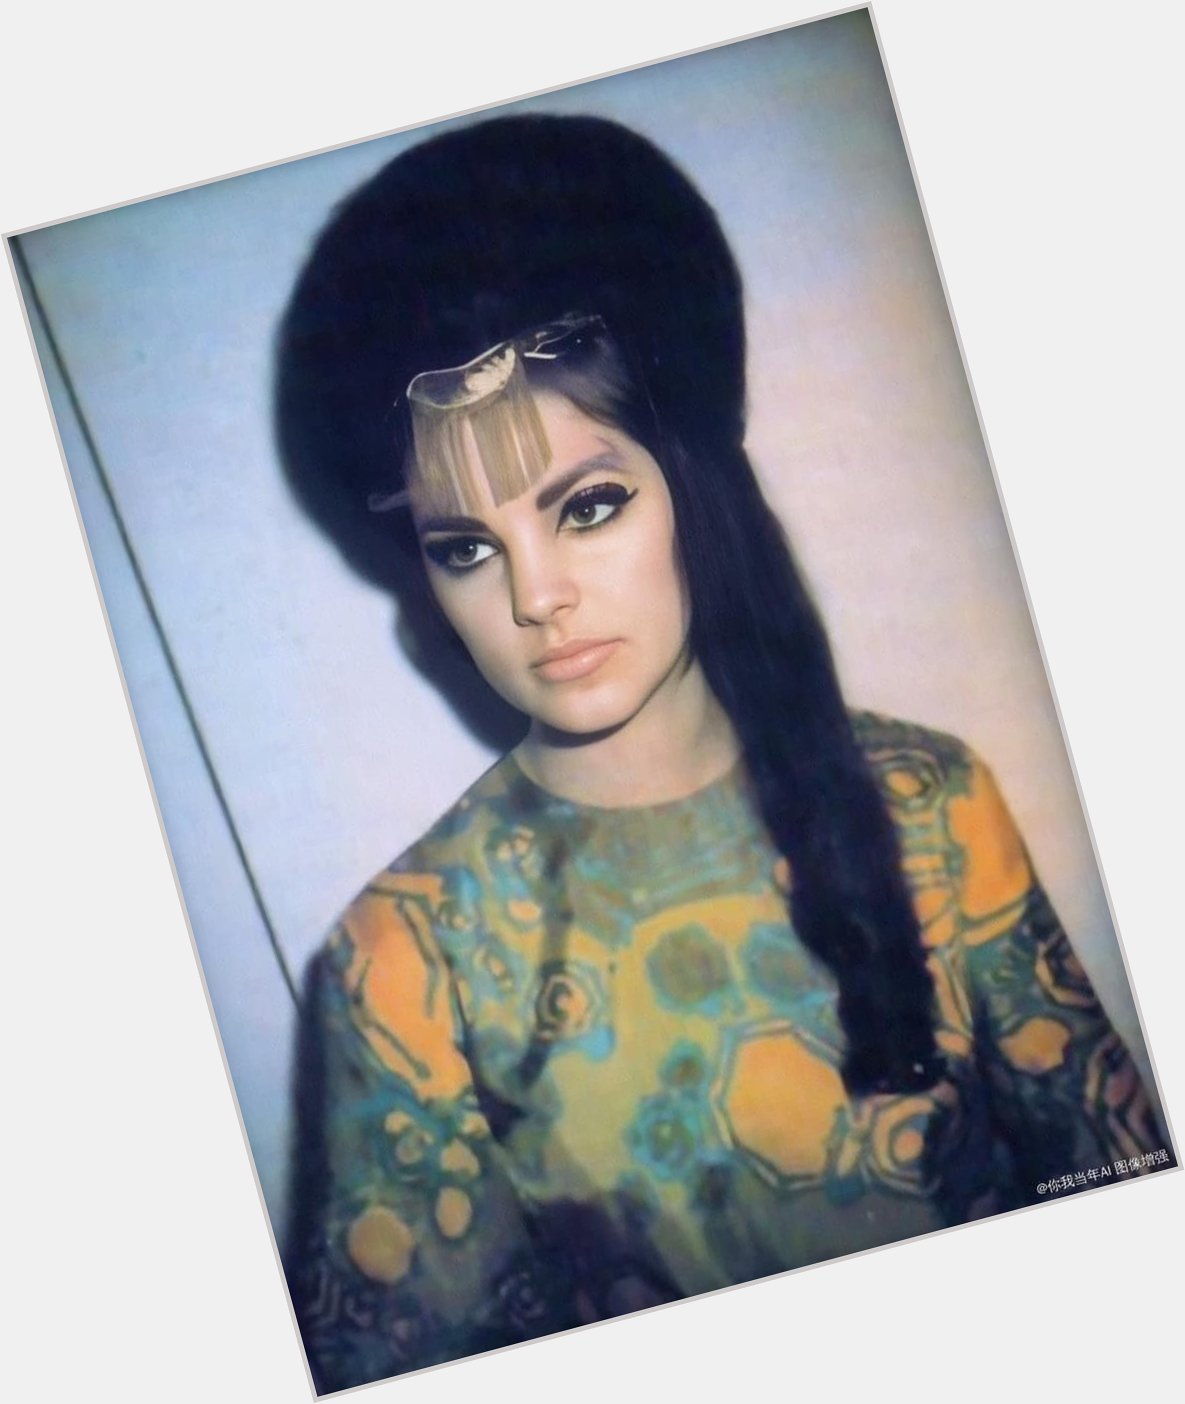 Happy Birthday to Priscilla Presley, who turns 77 years young today. She s one of my favorite LA women . 